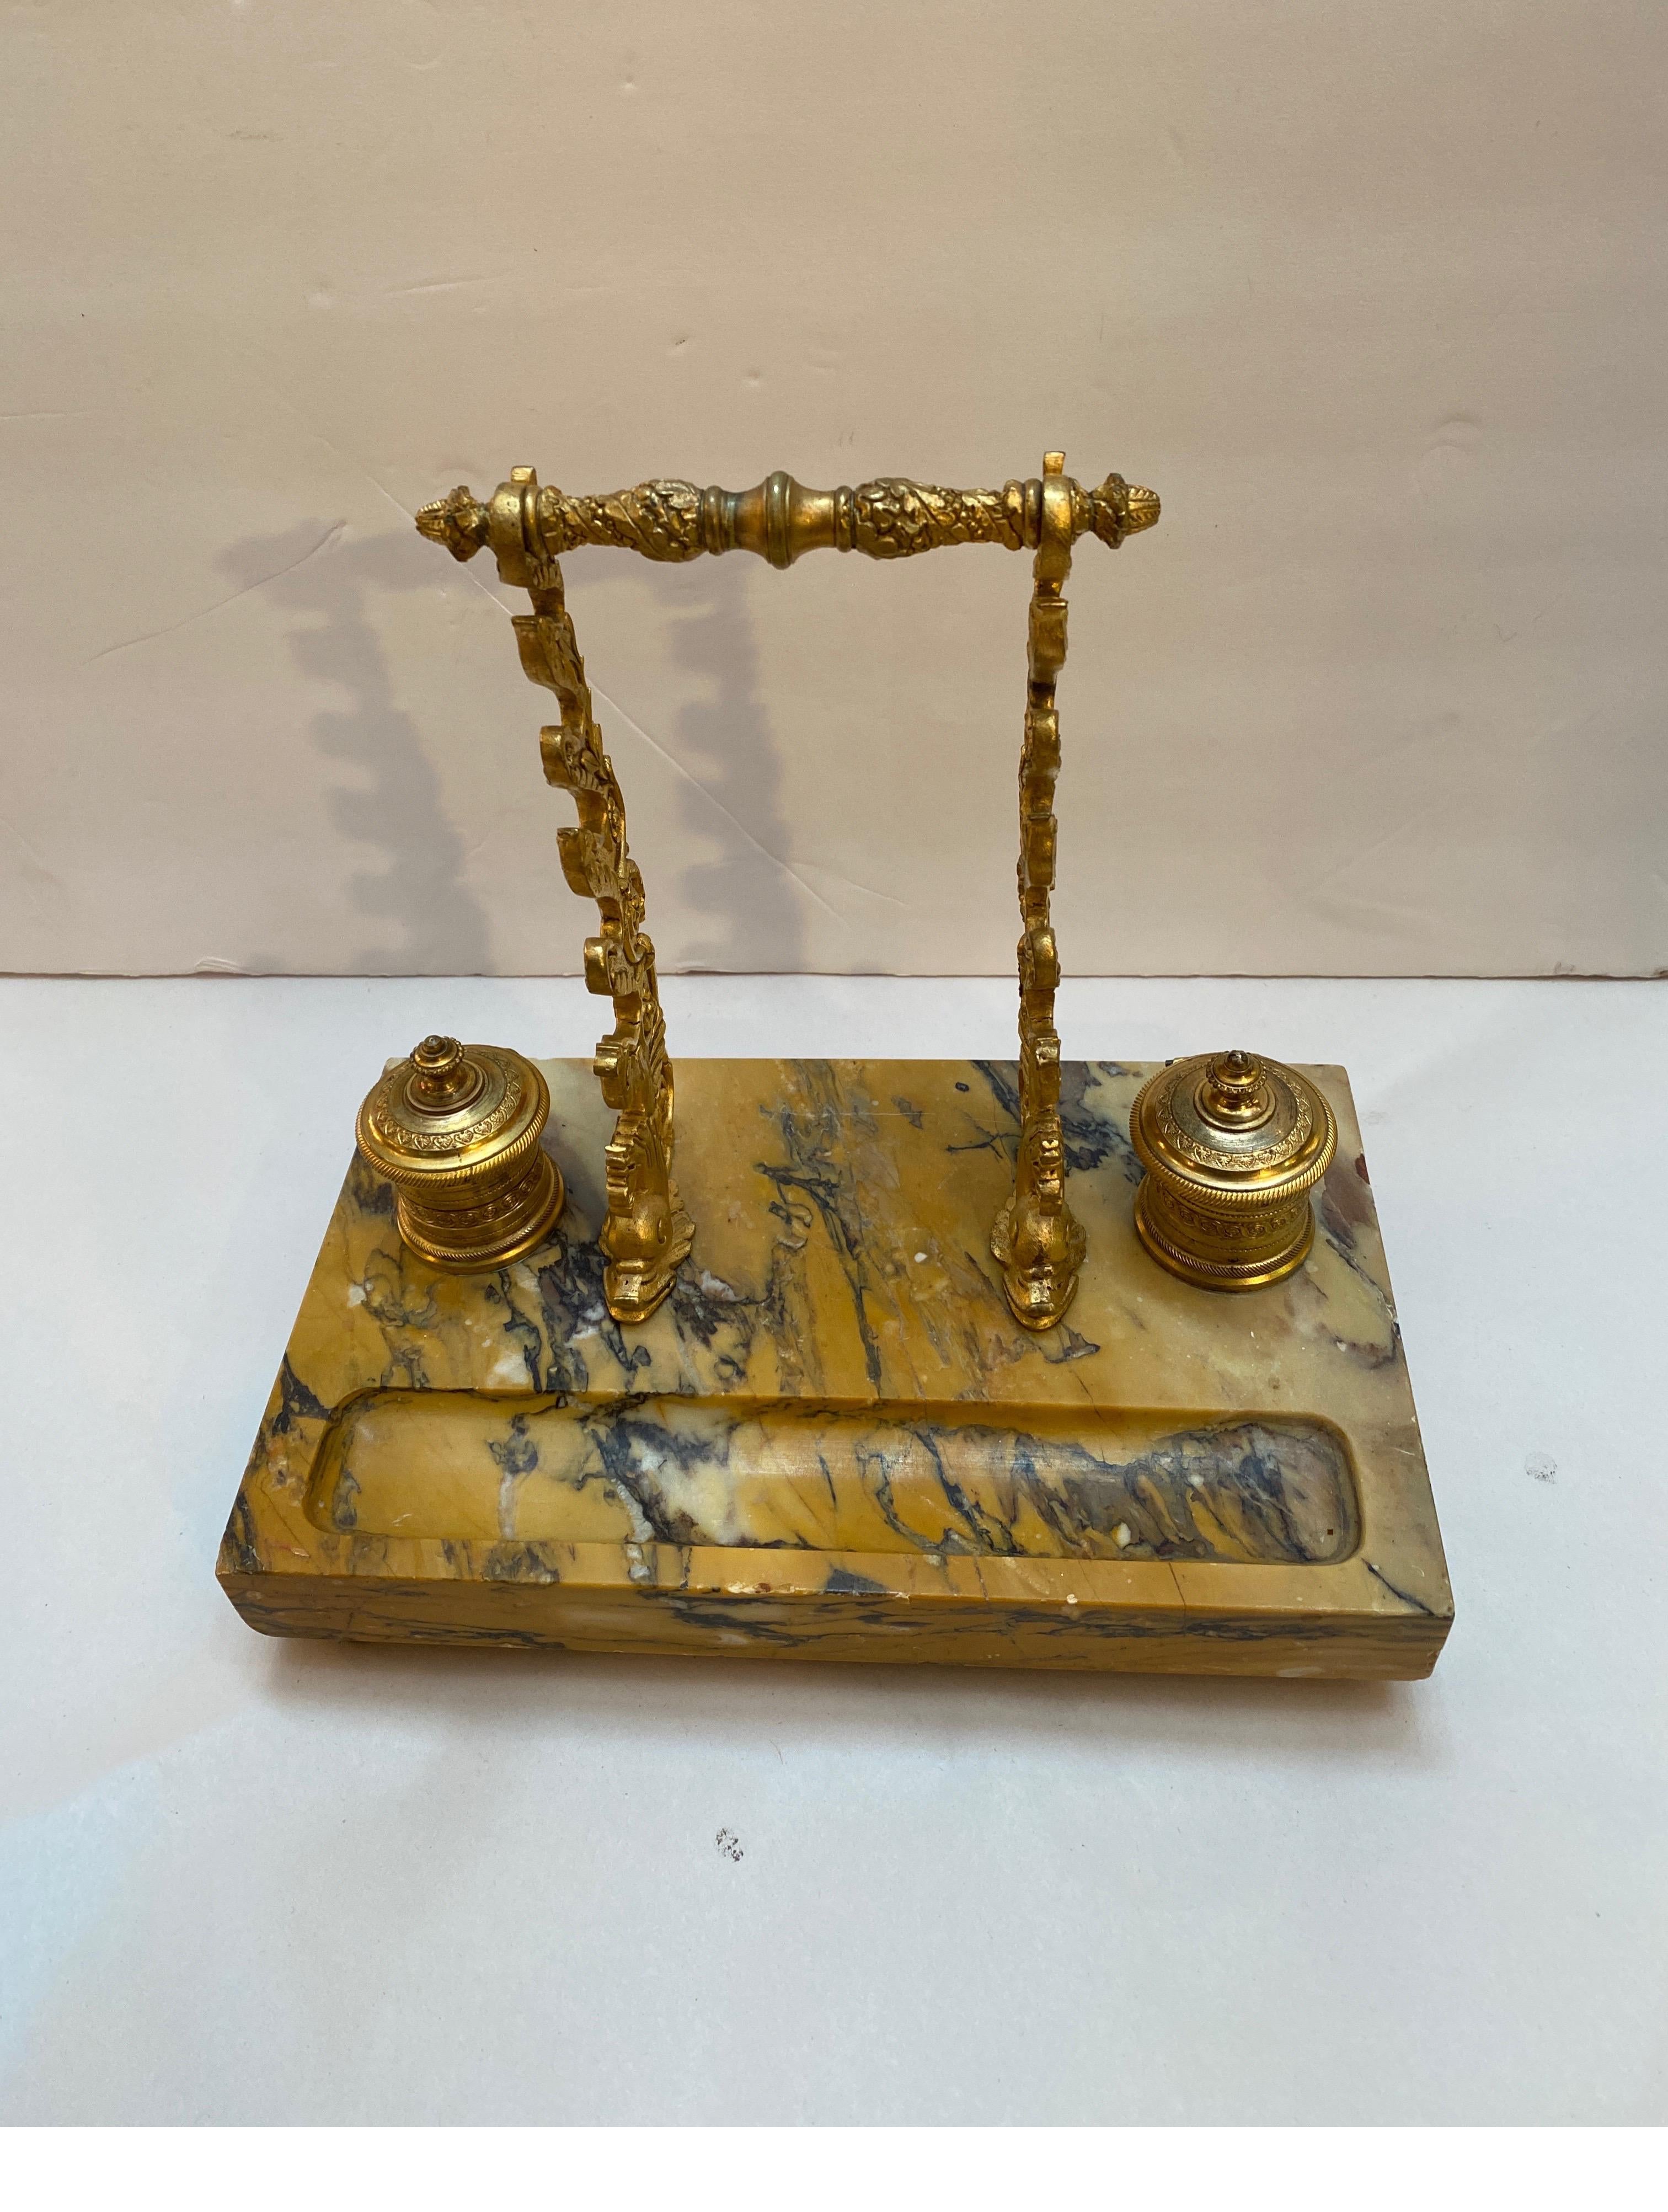 Siena Marble and Ormolu Double Inkstand Late 19th Century For Sale 6